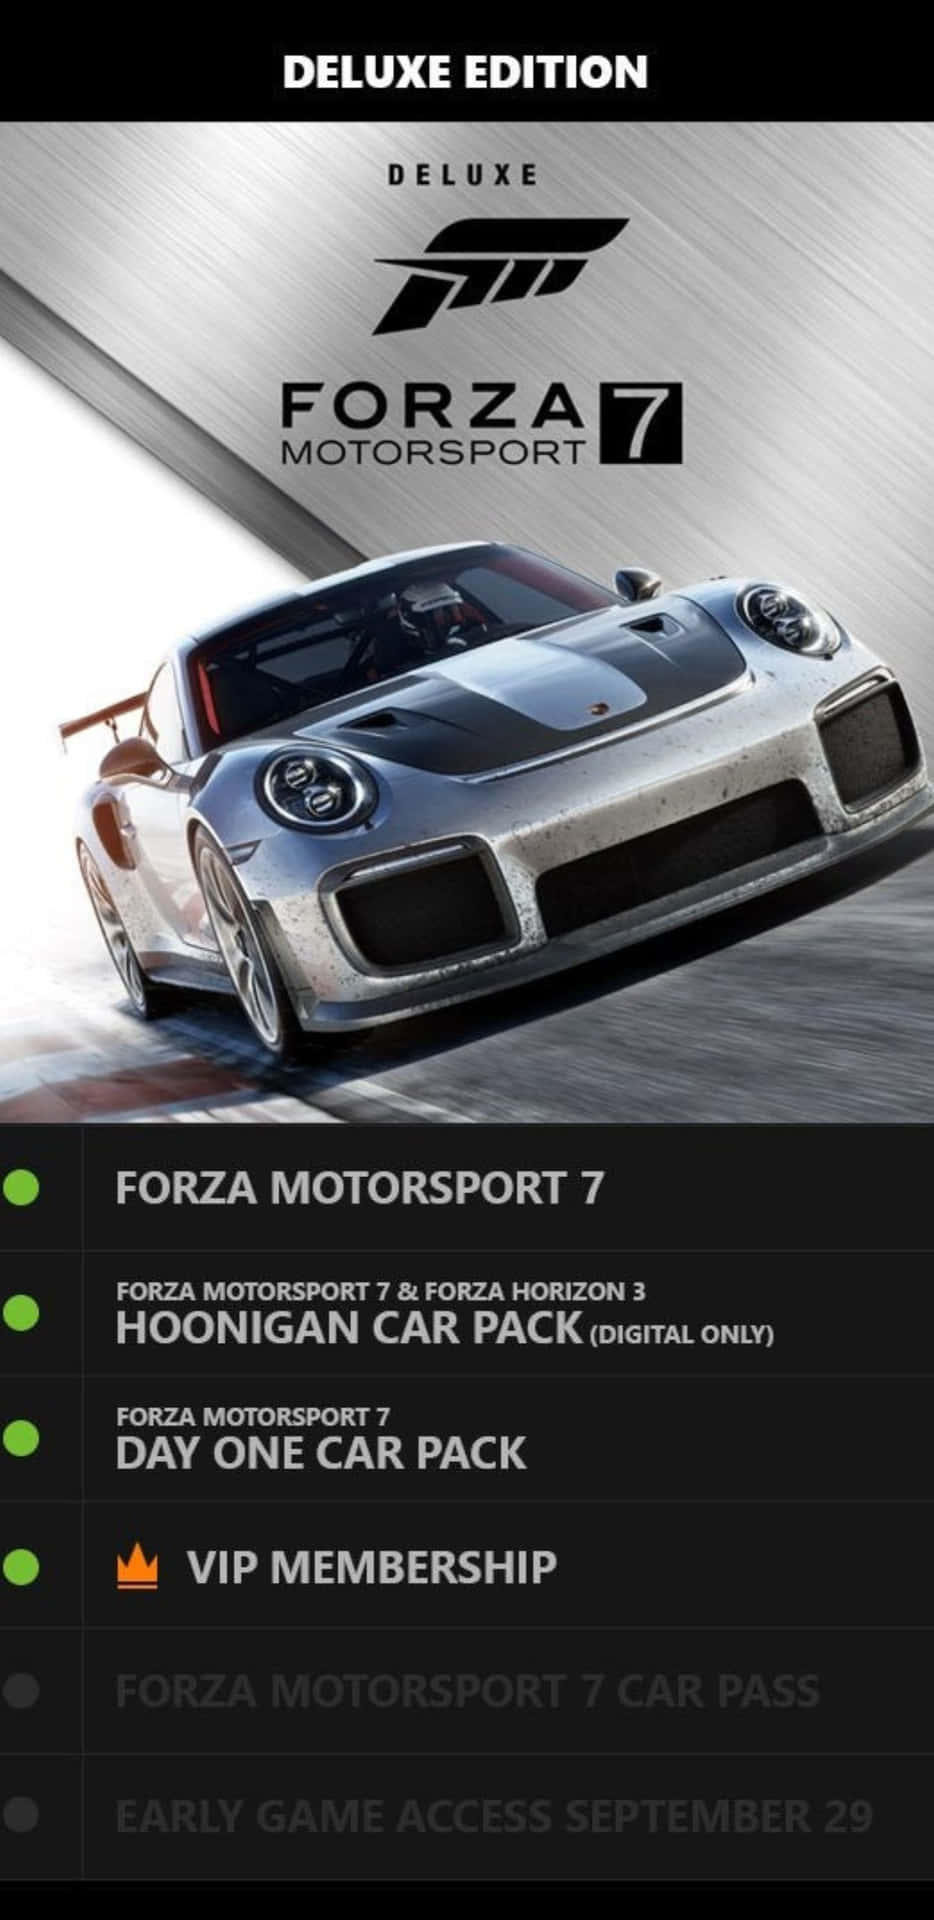 Forzamotorsport 7 Deluxe Edition